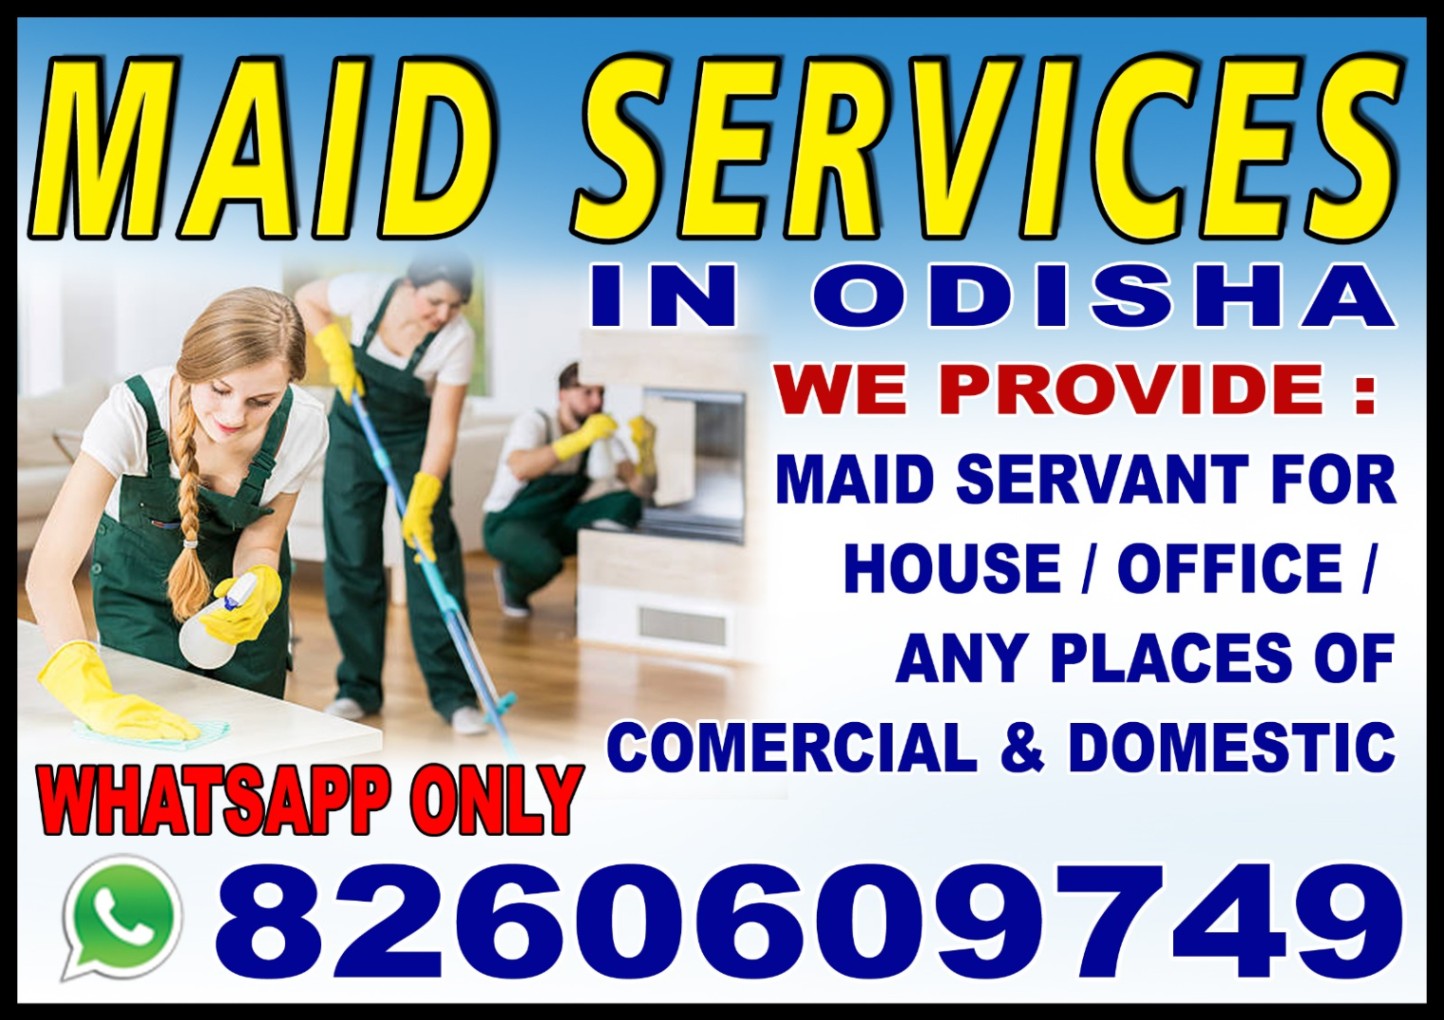 Pet care, Gardening/ Landscaping, Driver/ Taxi service, Cooking service, Elderly Care, Child Care, Domestic delivery, Maid/ Domestic help